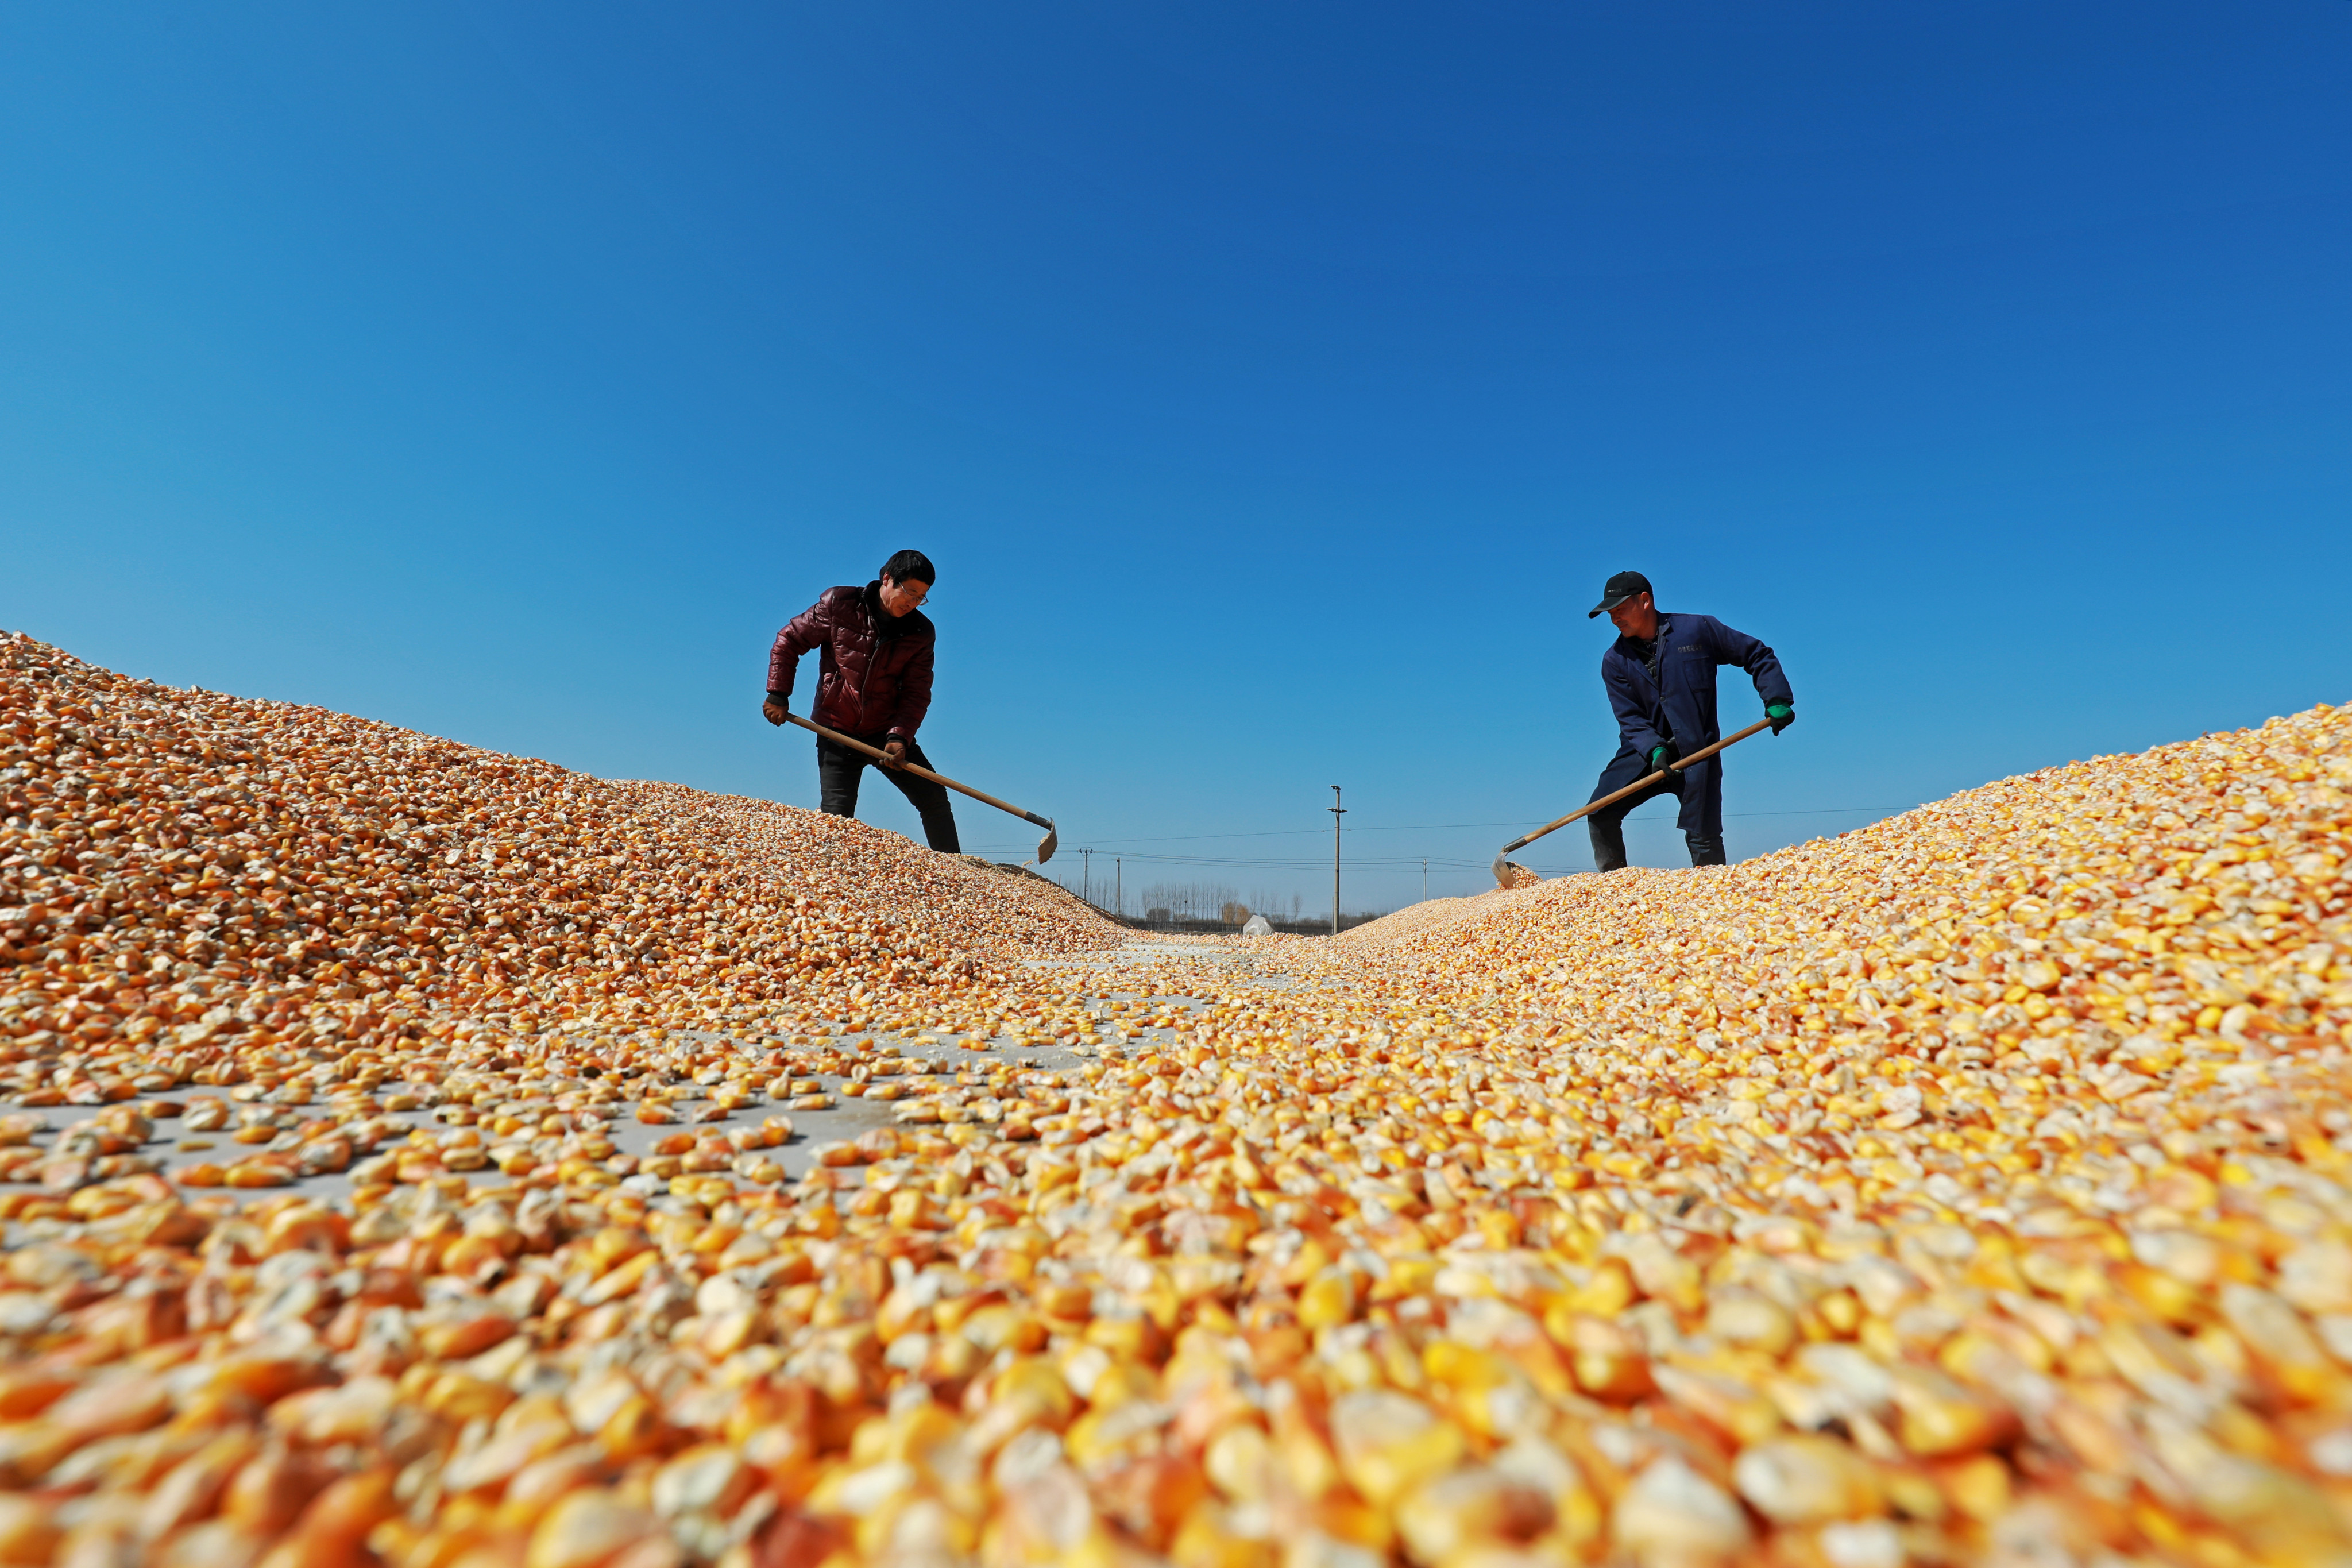 China has bought 4.39 million tonnes of US corn this year, compared to 6.36 million tonnes over the same period in 2022, according to the US data. Photo: Shutterstock